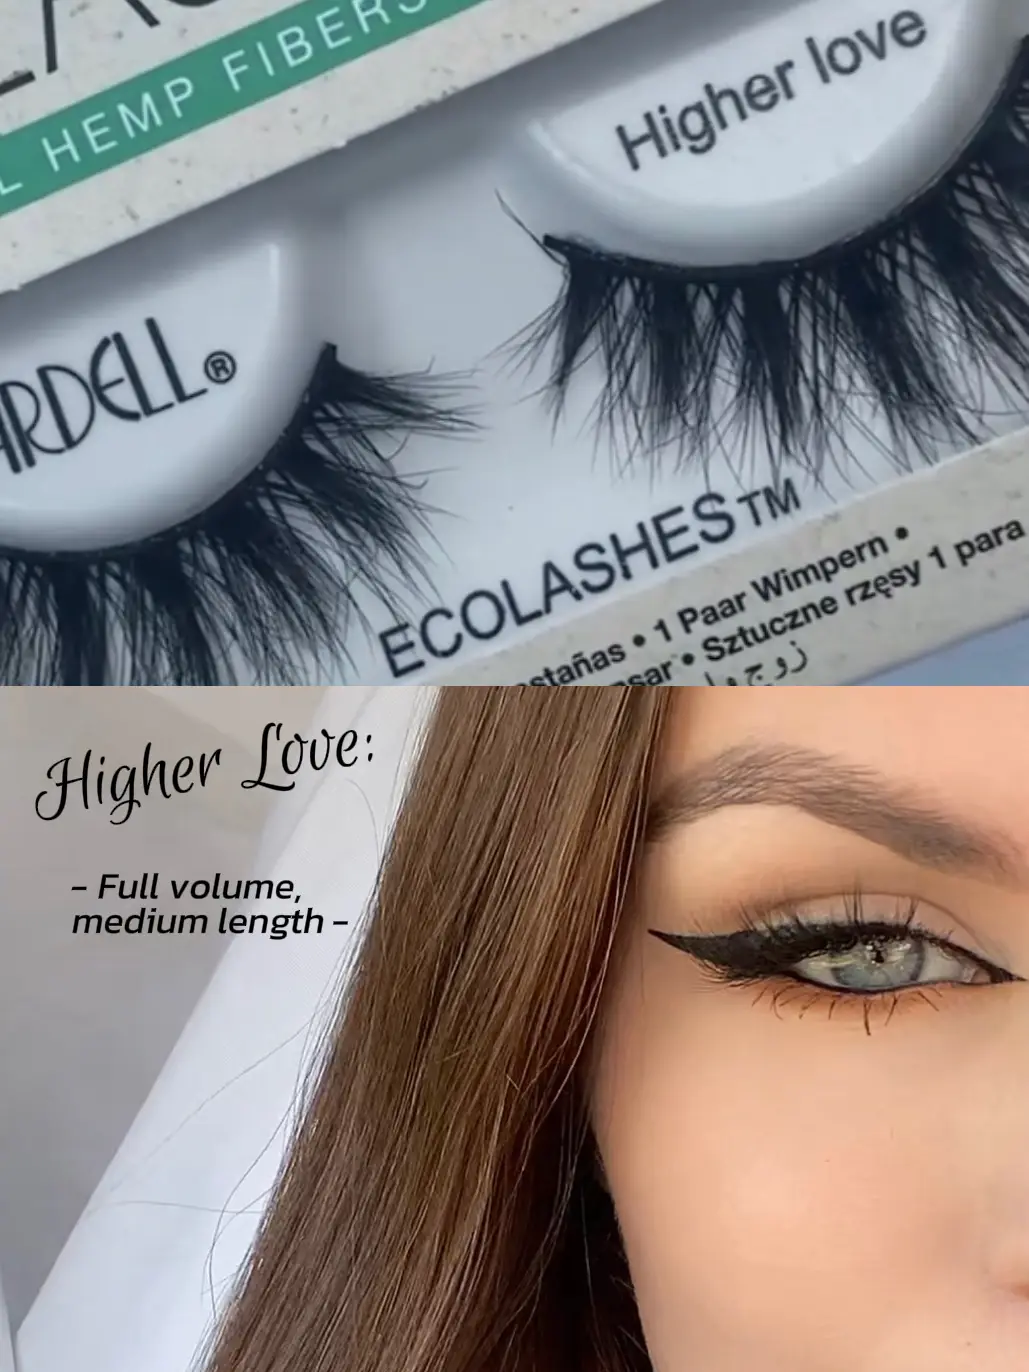 Ardell 3D Faux Mink 862 Lashes, Cruelty Free Eyelashes